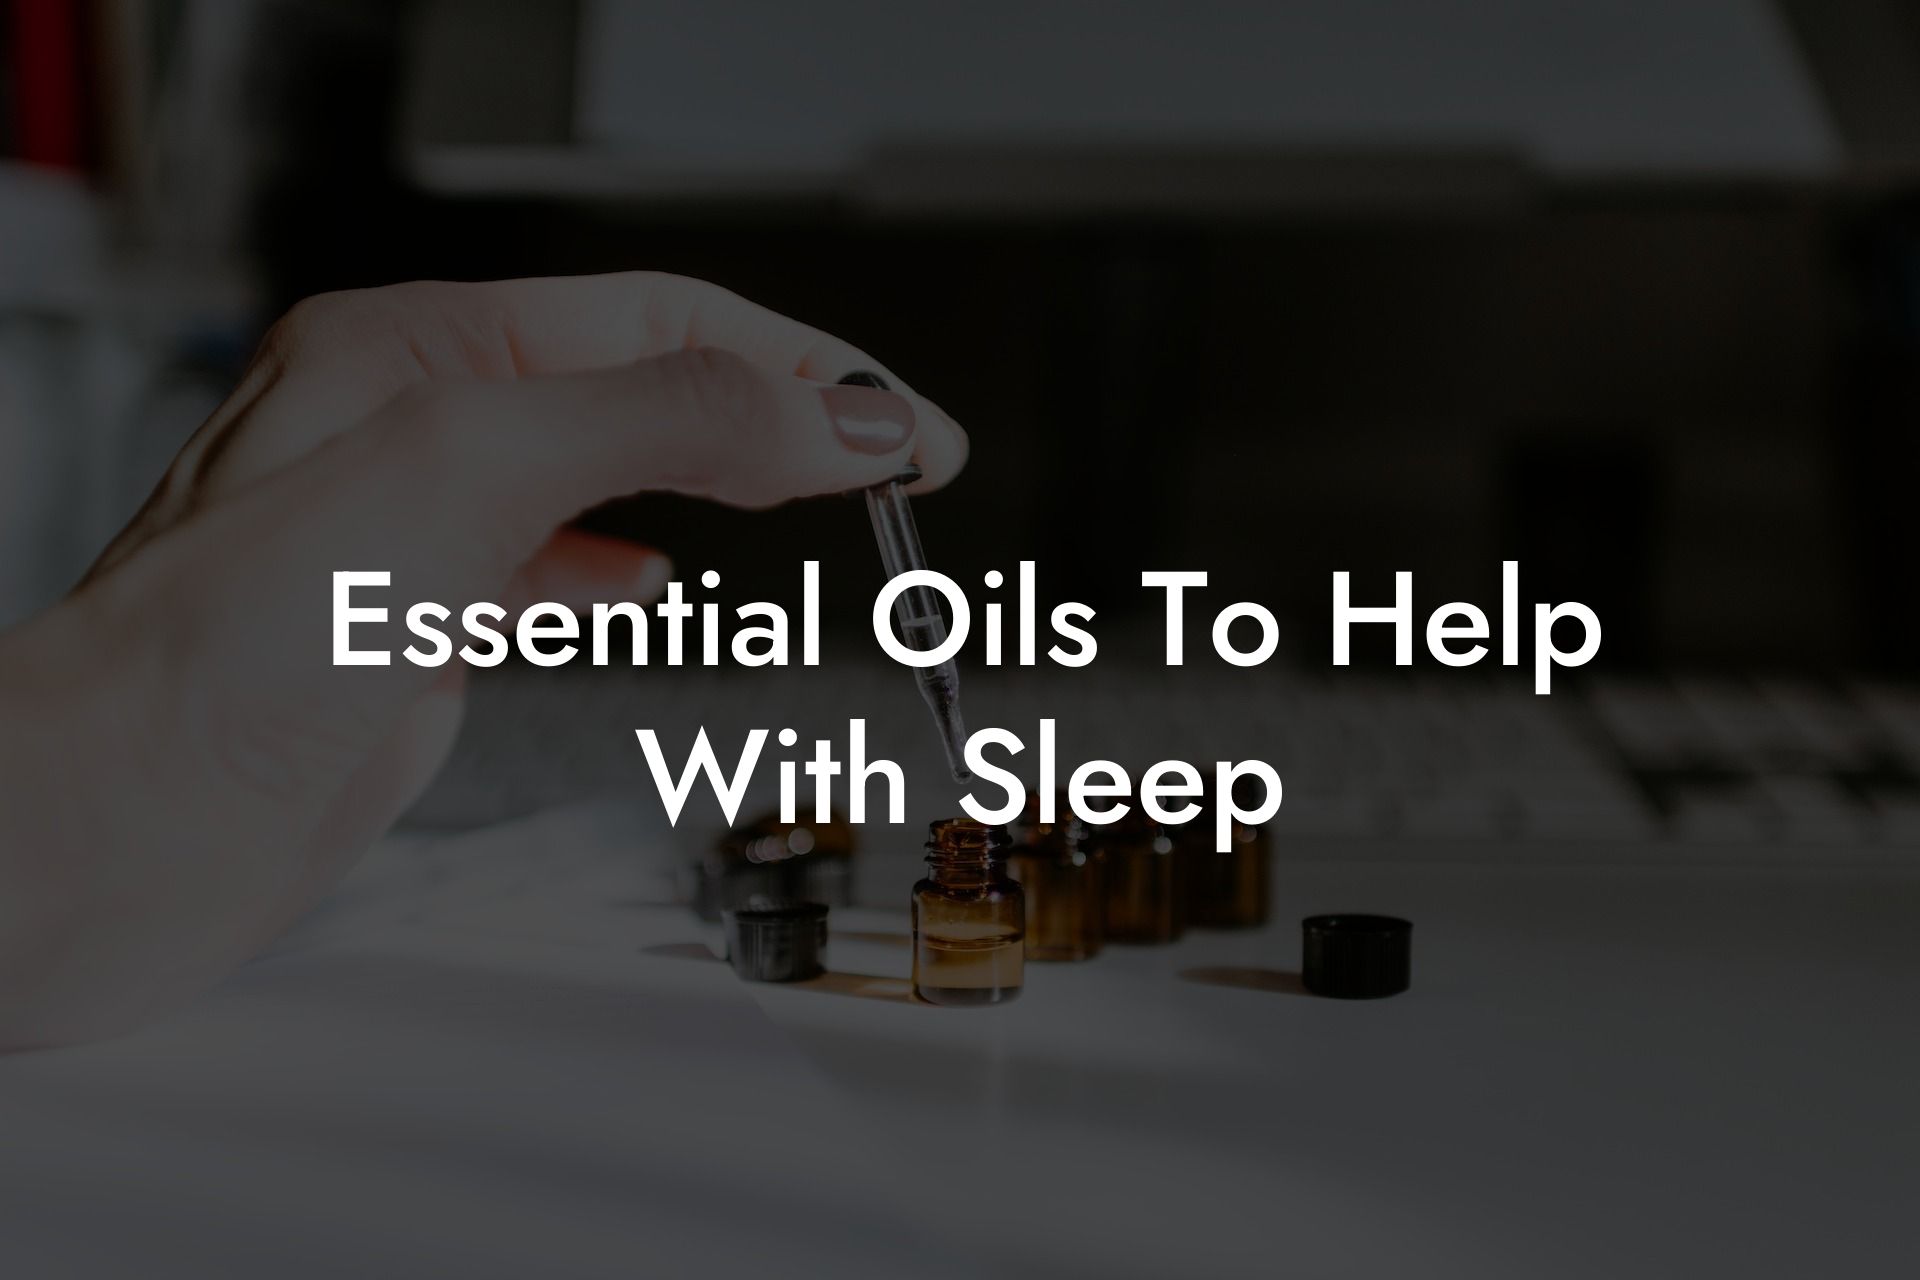 Essential Oils To Help With Sleep